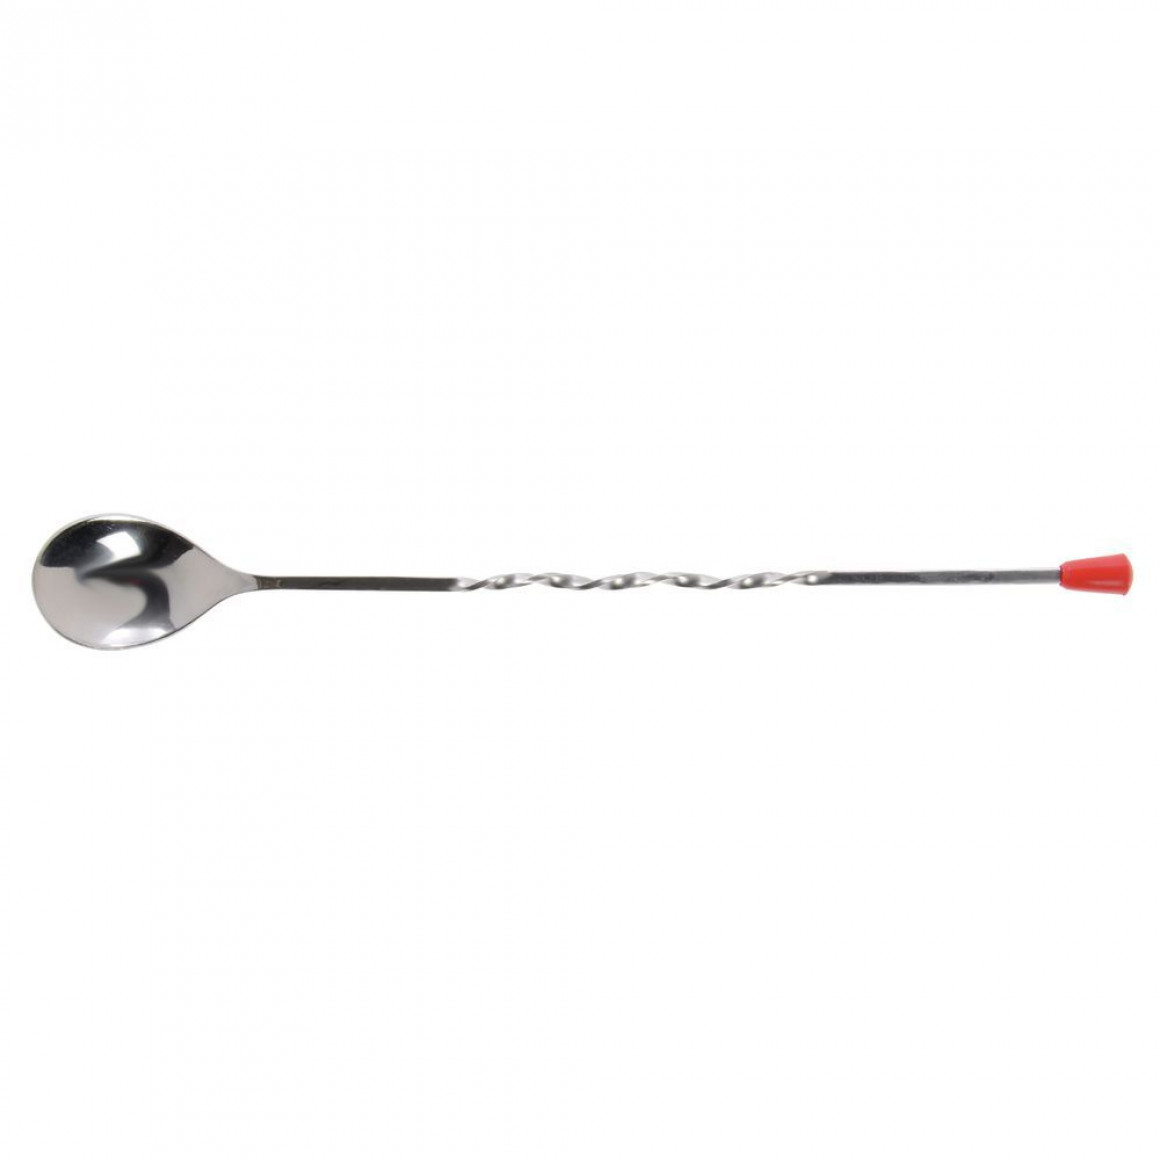 BAR SPOON, STAINLESS STEEL, TWISTED, NO KNOB, 11